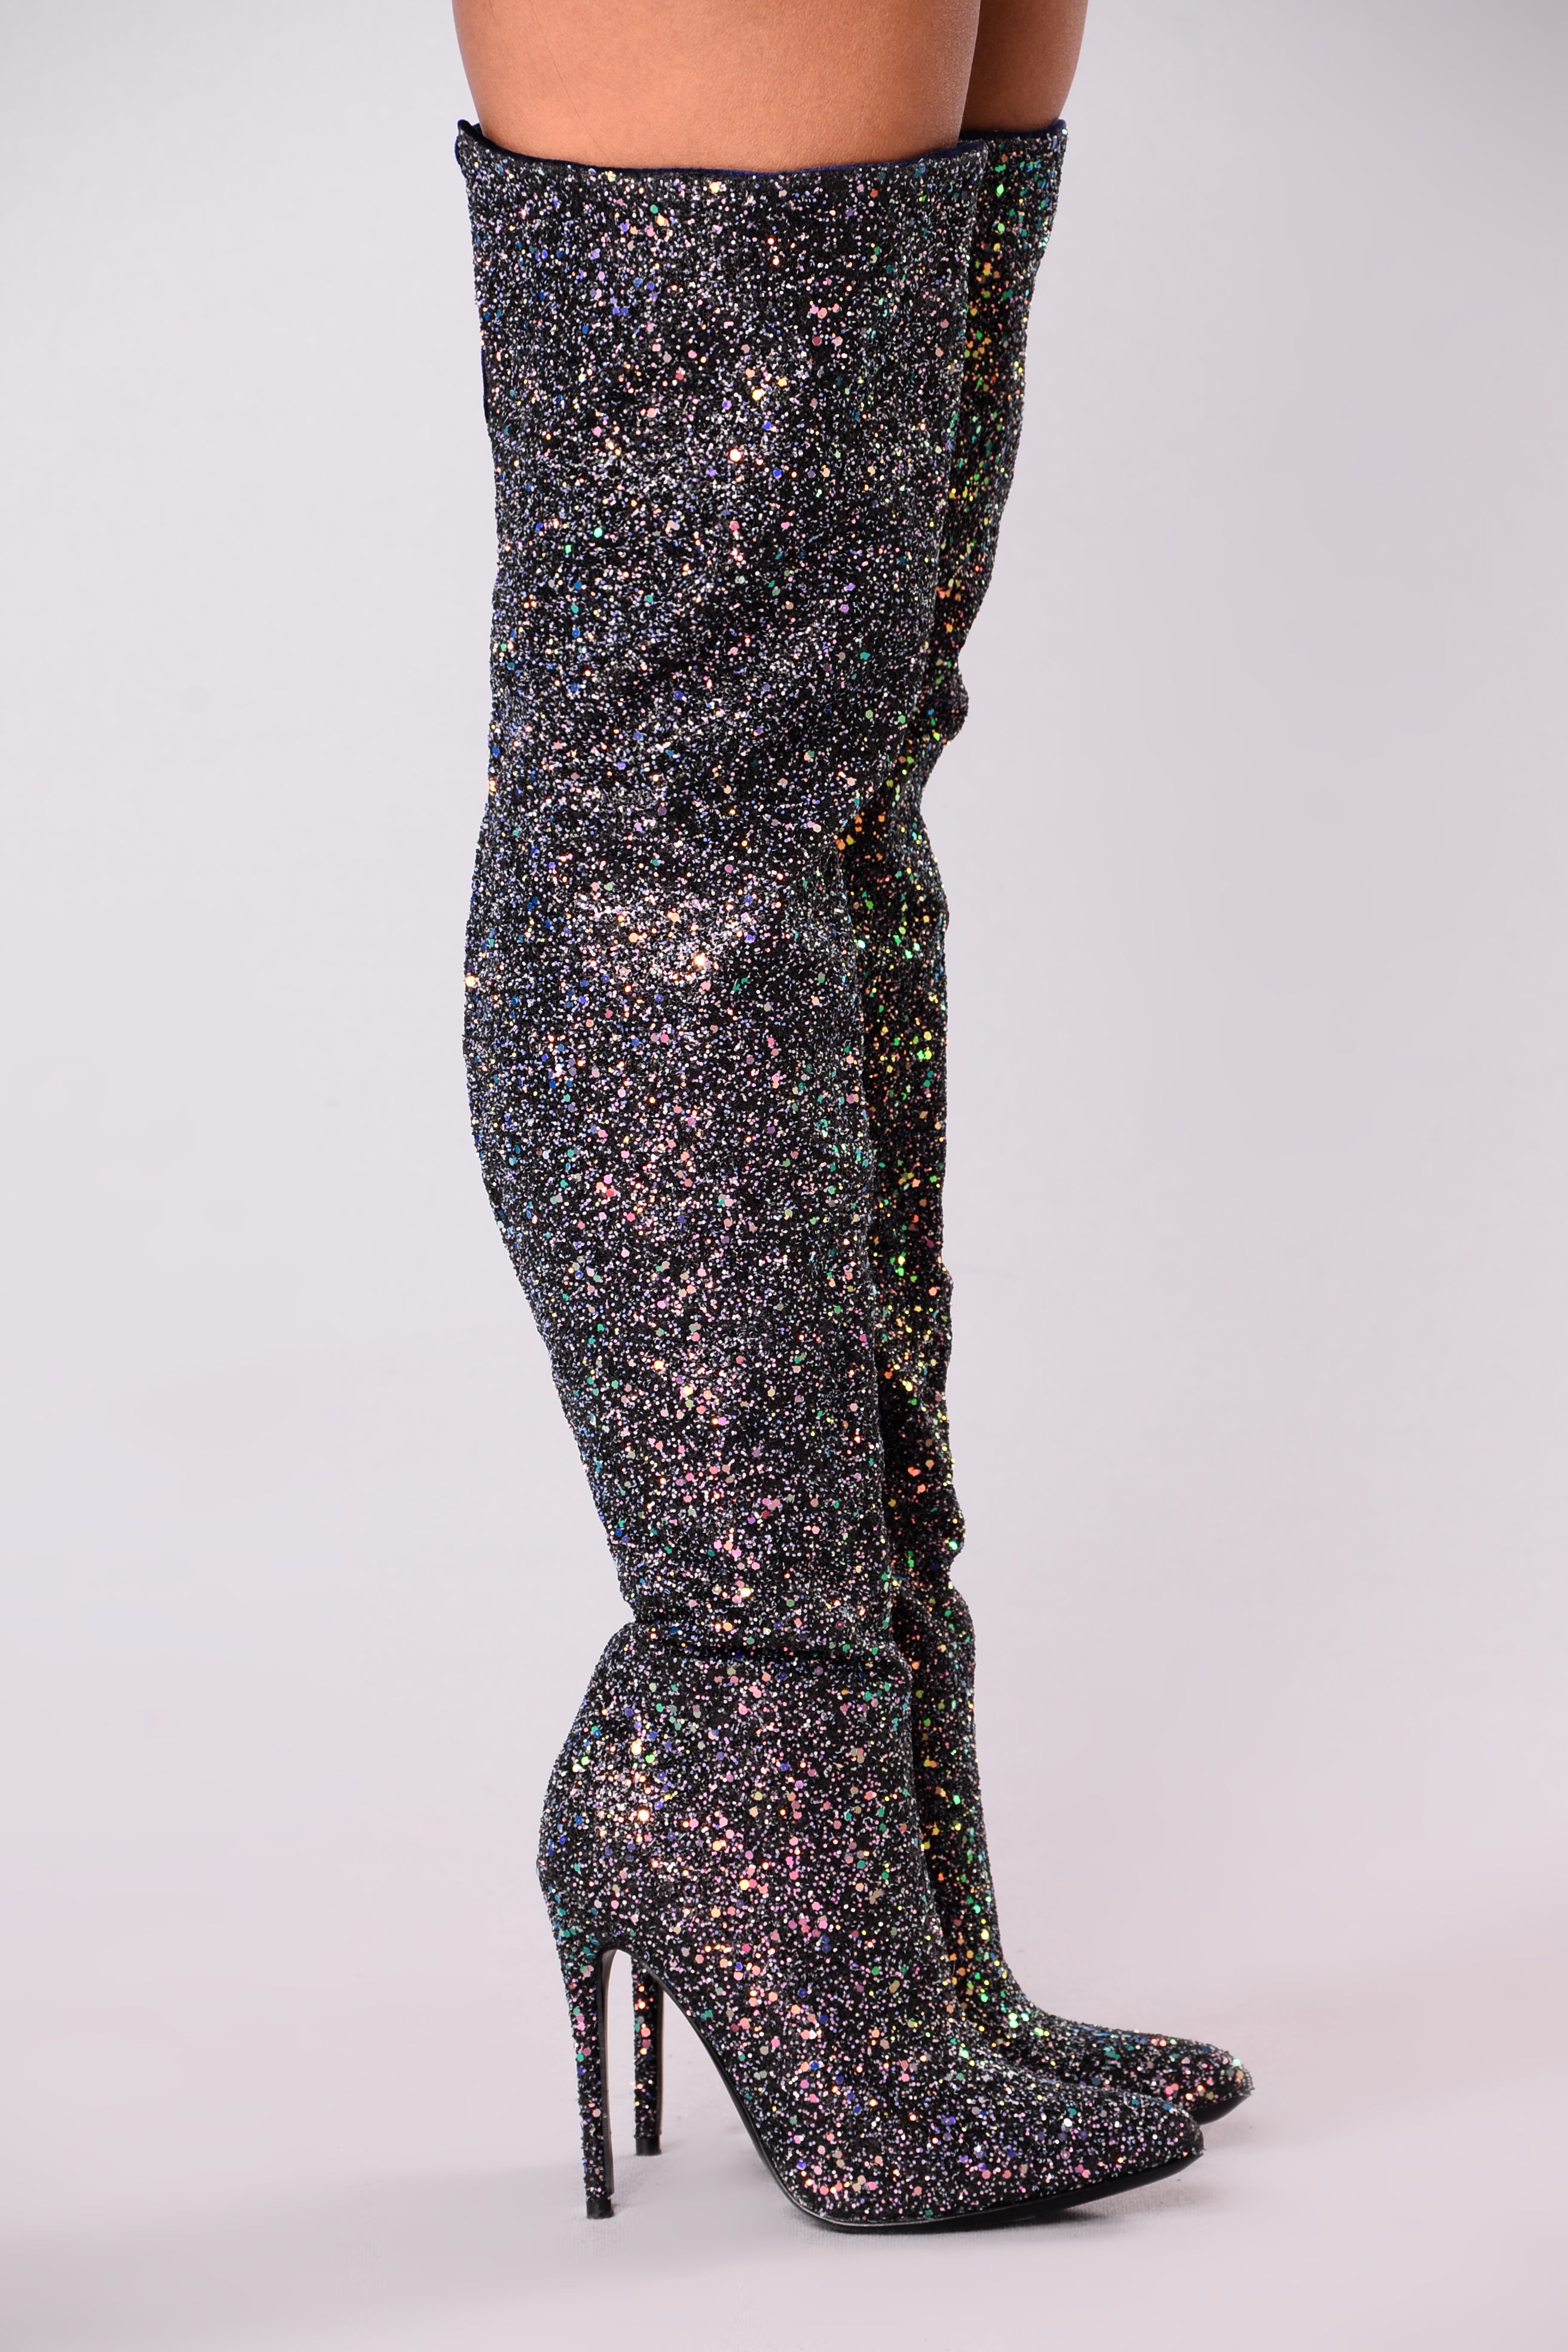 black sparkly knee high boots